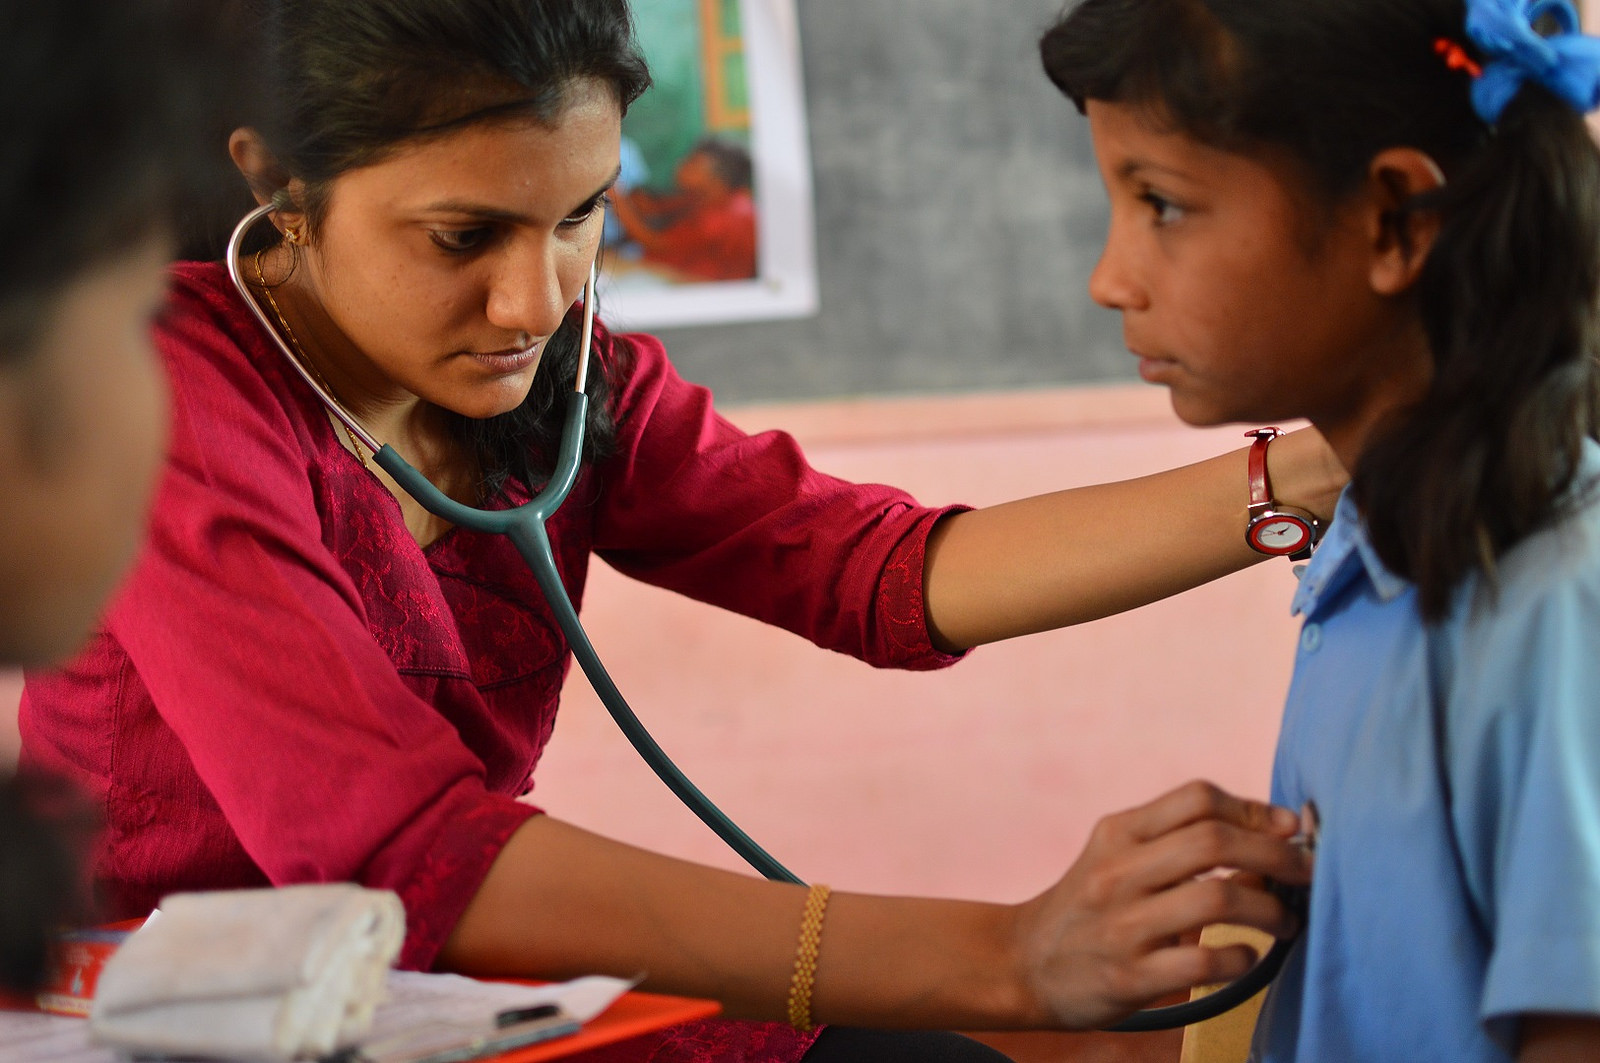 School health services, Bangalore (Trinity Care Foundation/Flickr CC BY-NC-ND 2.0)